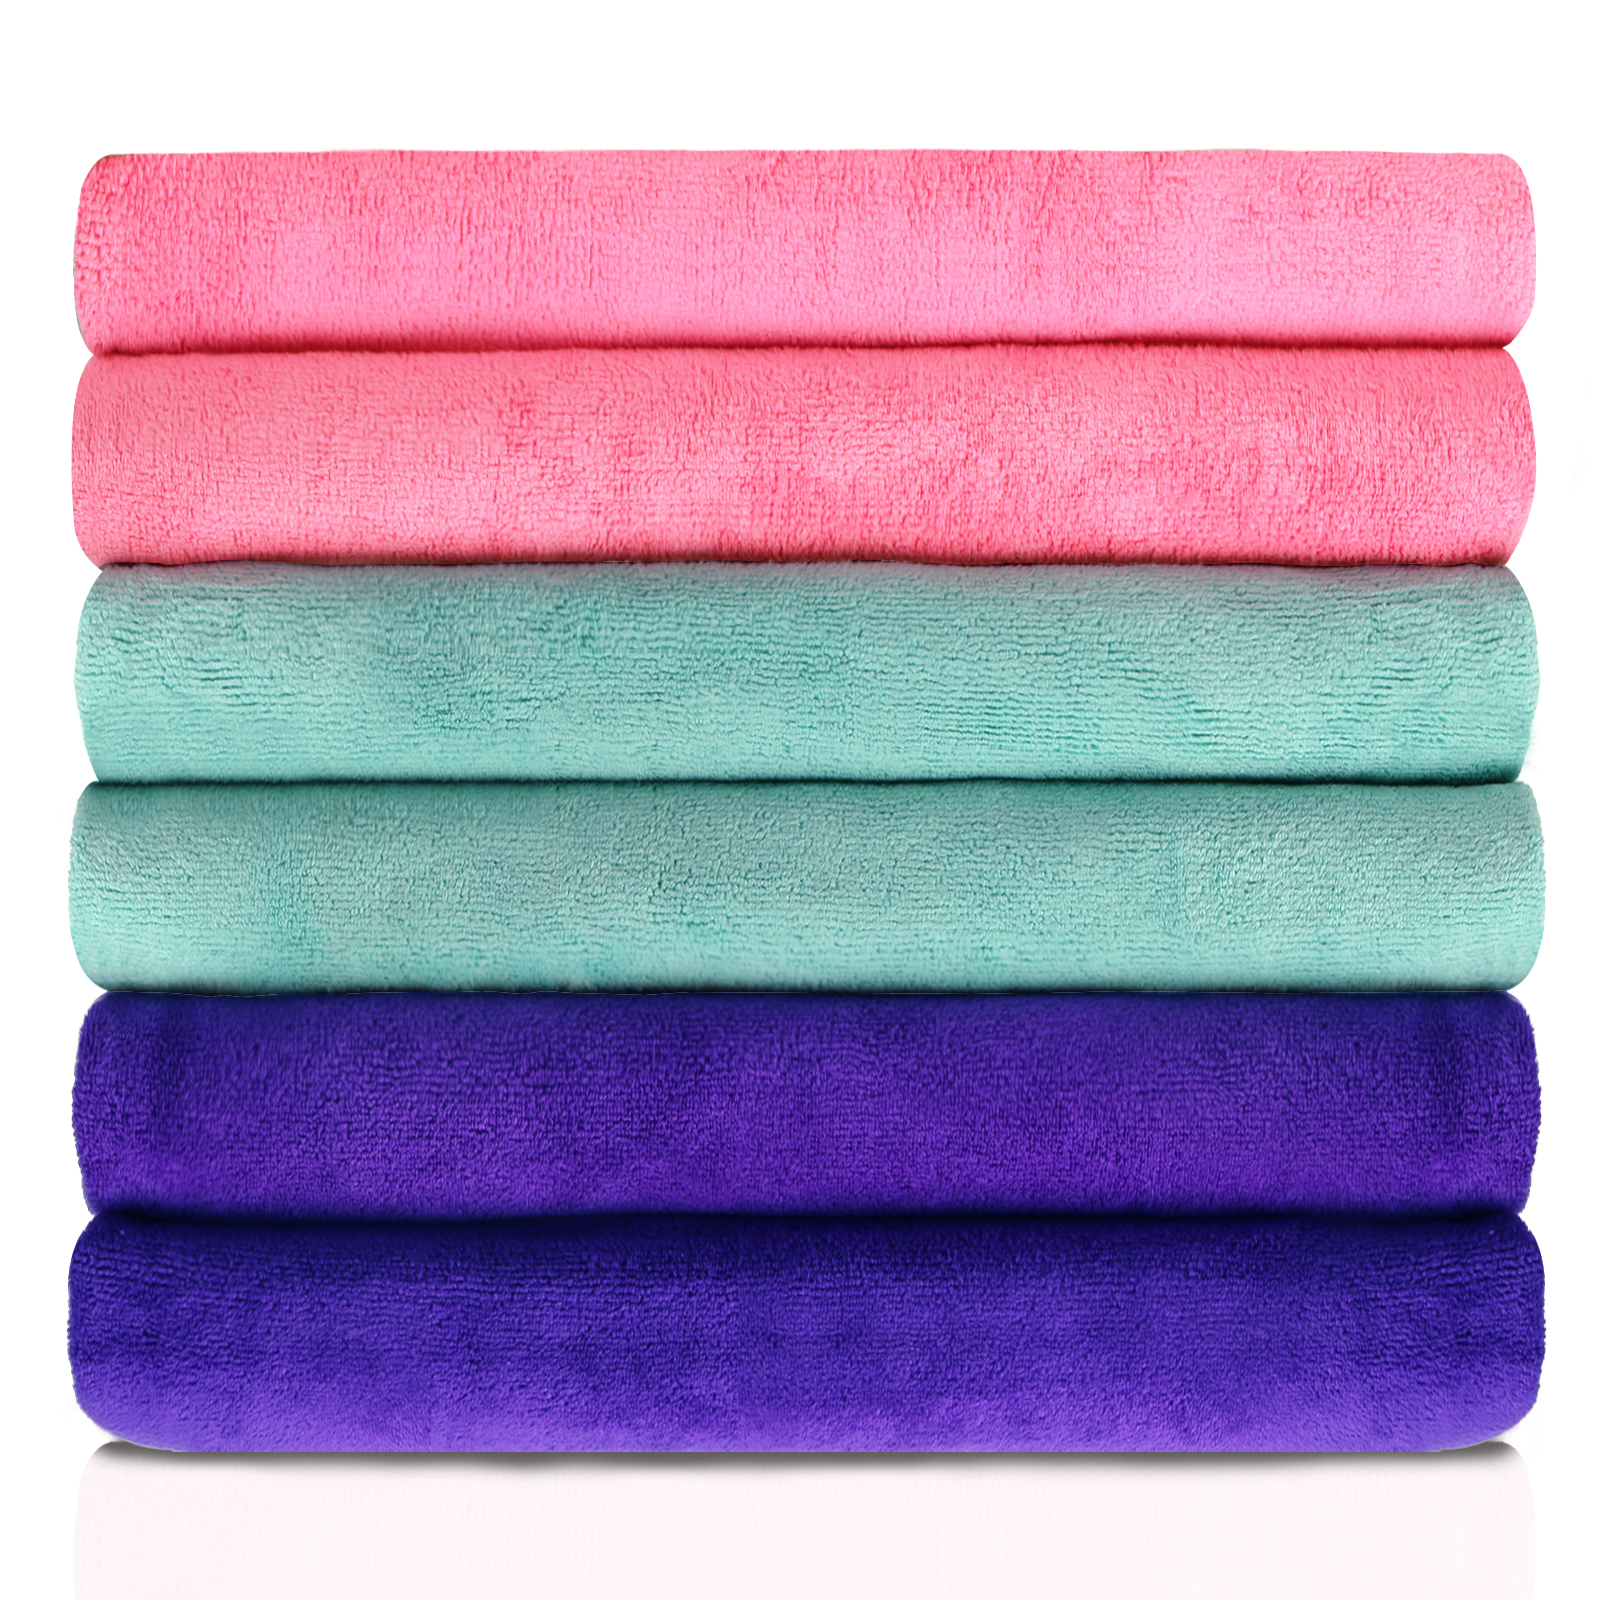 JML Bath Towel, Microfiber 6 Pack Towel Sets (27 x 55") - Extra Absorbent, Fast Drying Multipurpose Use as Bath Fitness Towel, Sports Towels, Yoga Towel, Green Blue Pink - image 1 of 5